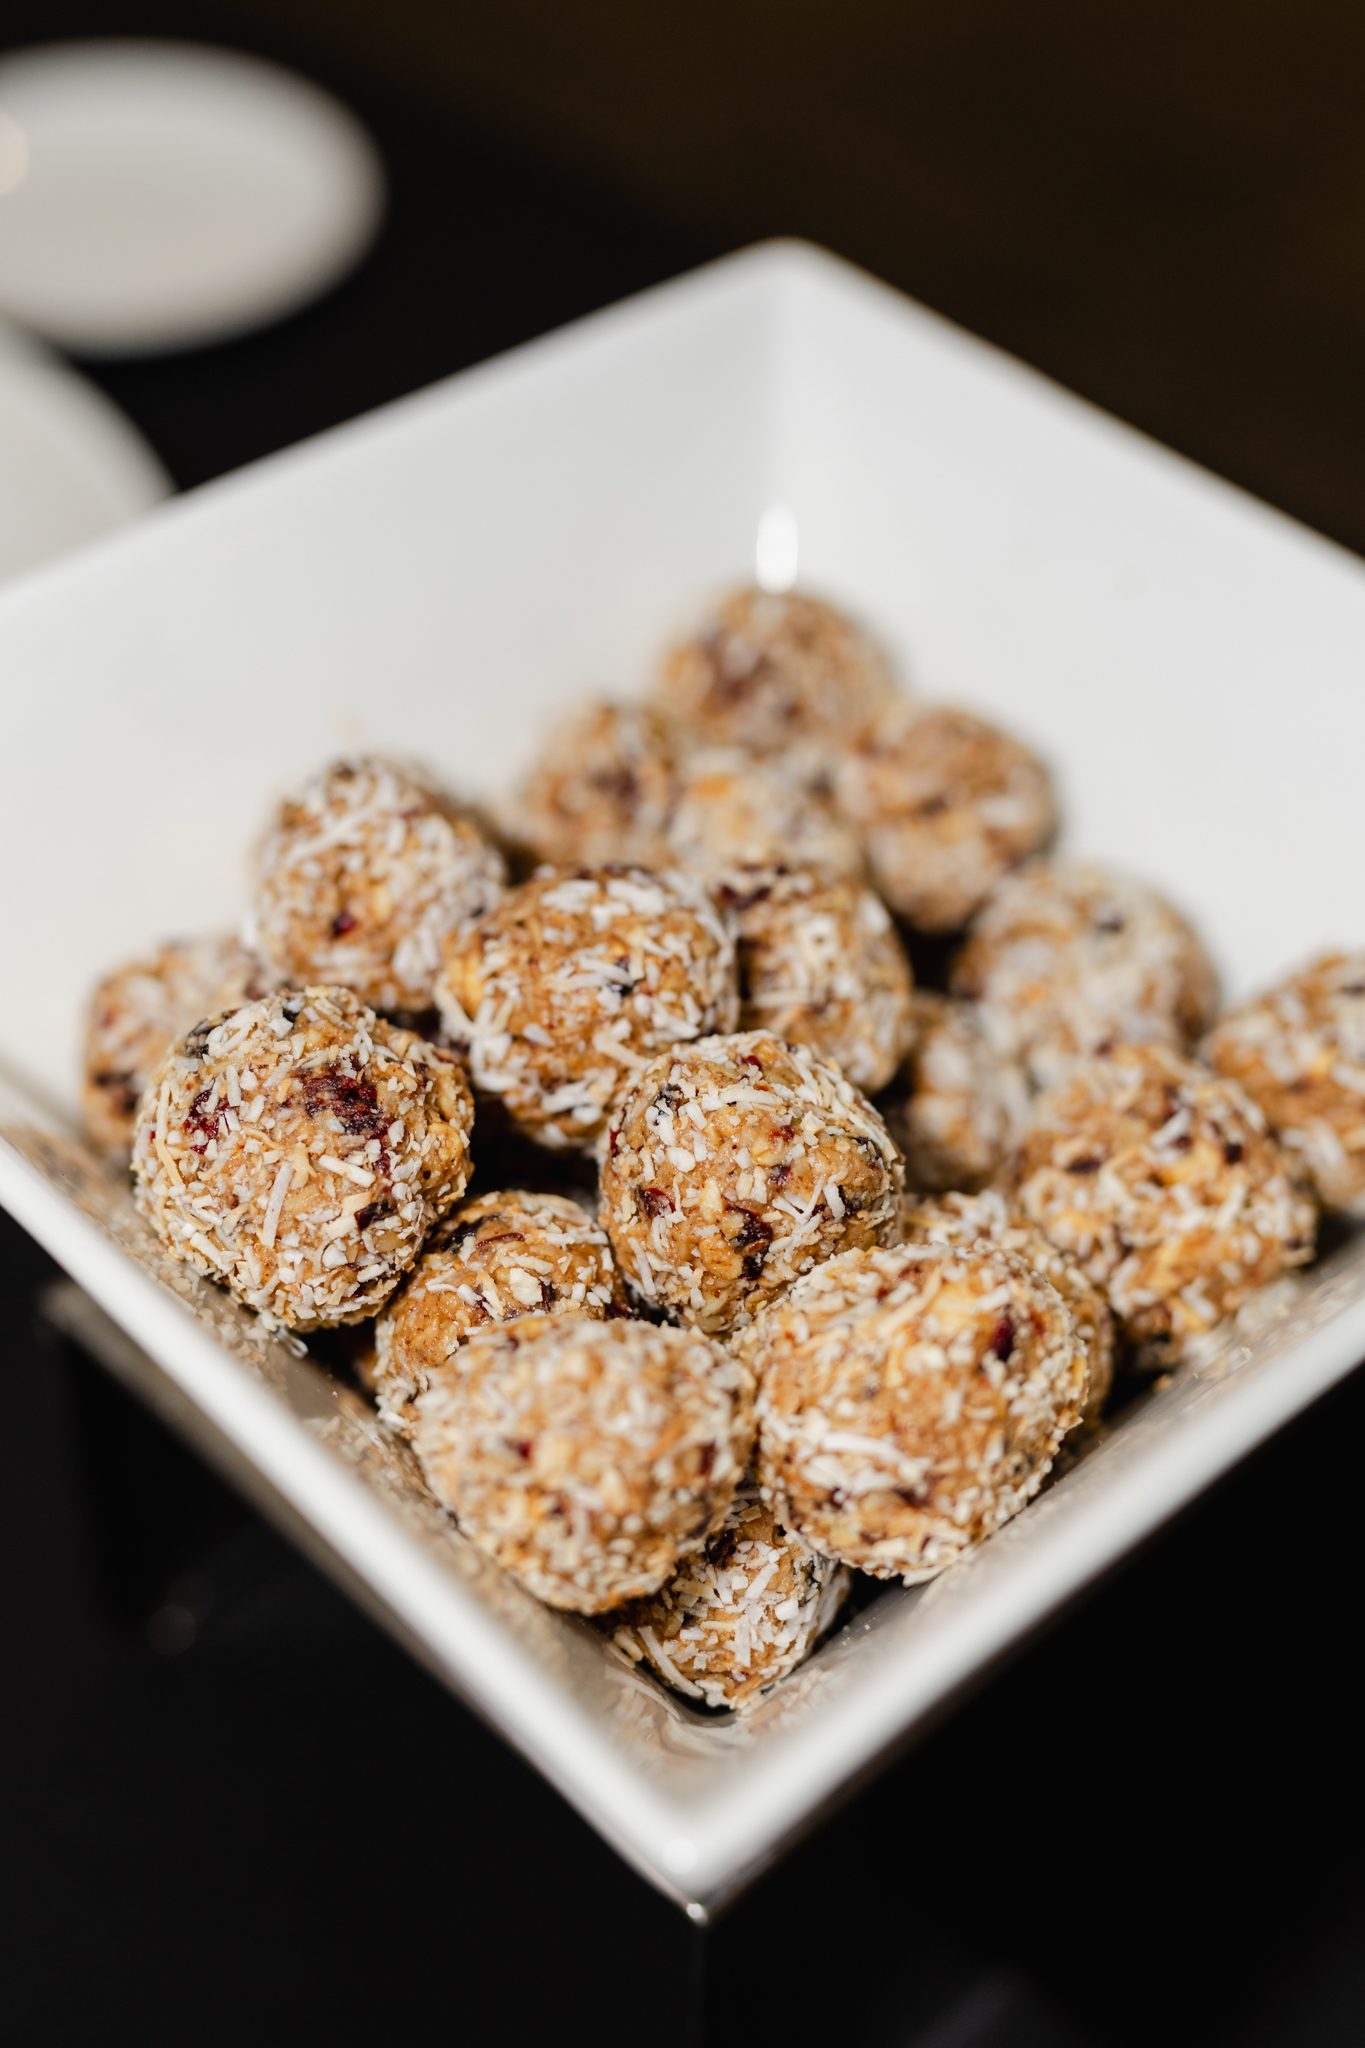 A white bowl filled with nut balls on a conference table.